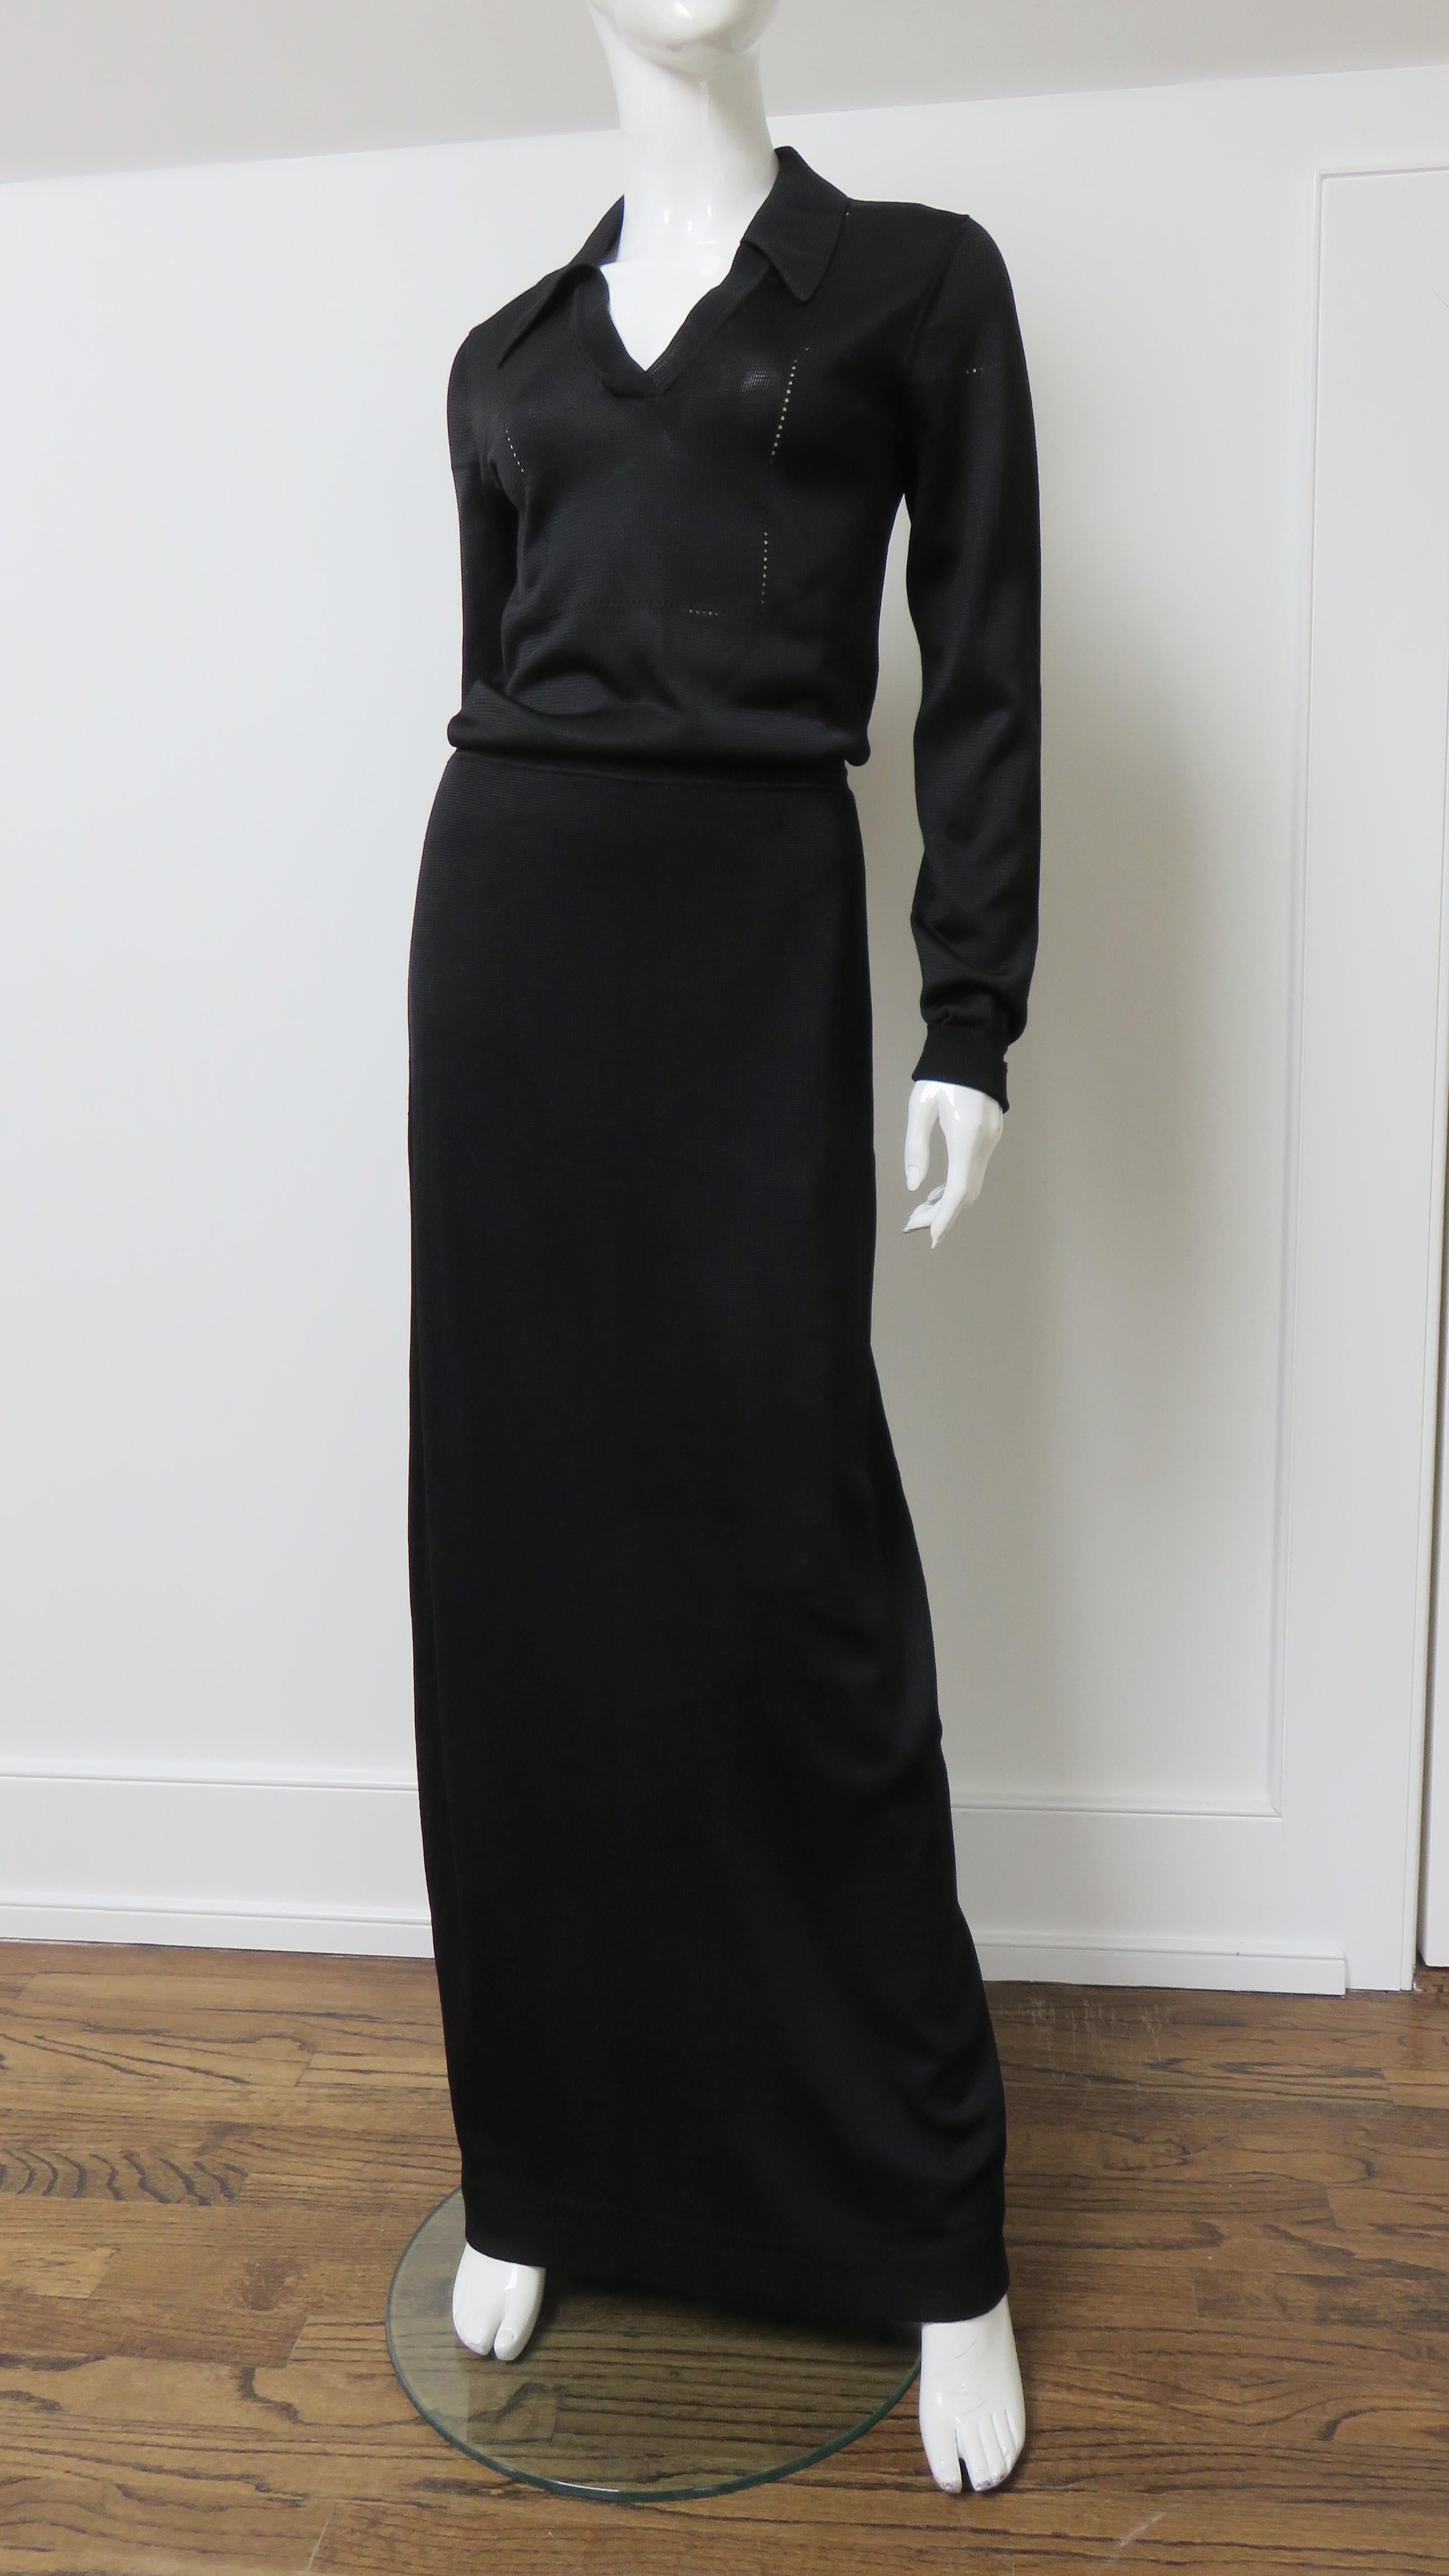 A sophisticated black floor length knit dress from Anne Fogarty made in 1970s British Hong Kong.  It has long sleeves with fold back cuffs, a shirt style collar and V neck.  It is semi fitted to the comfortable and flexible stretch waist and has a